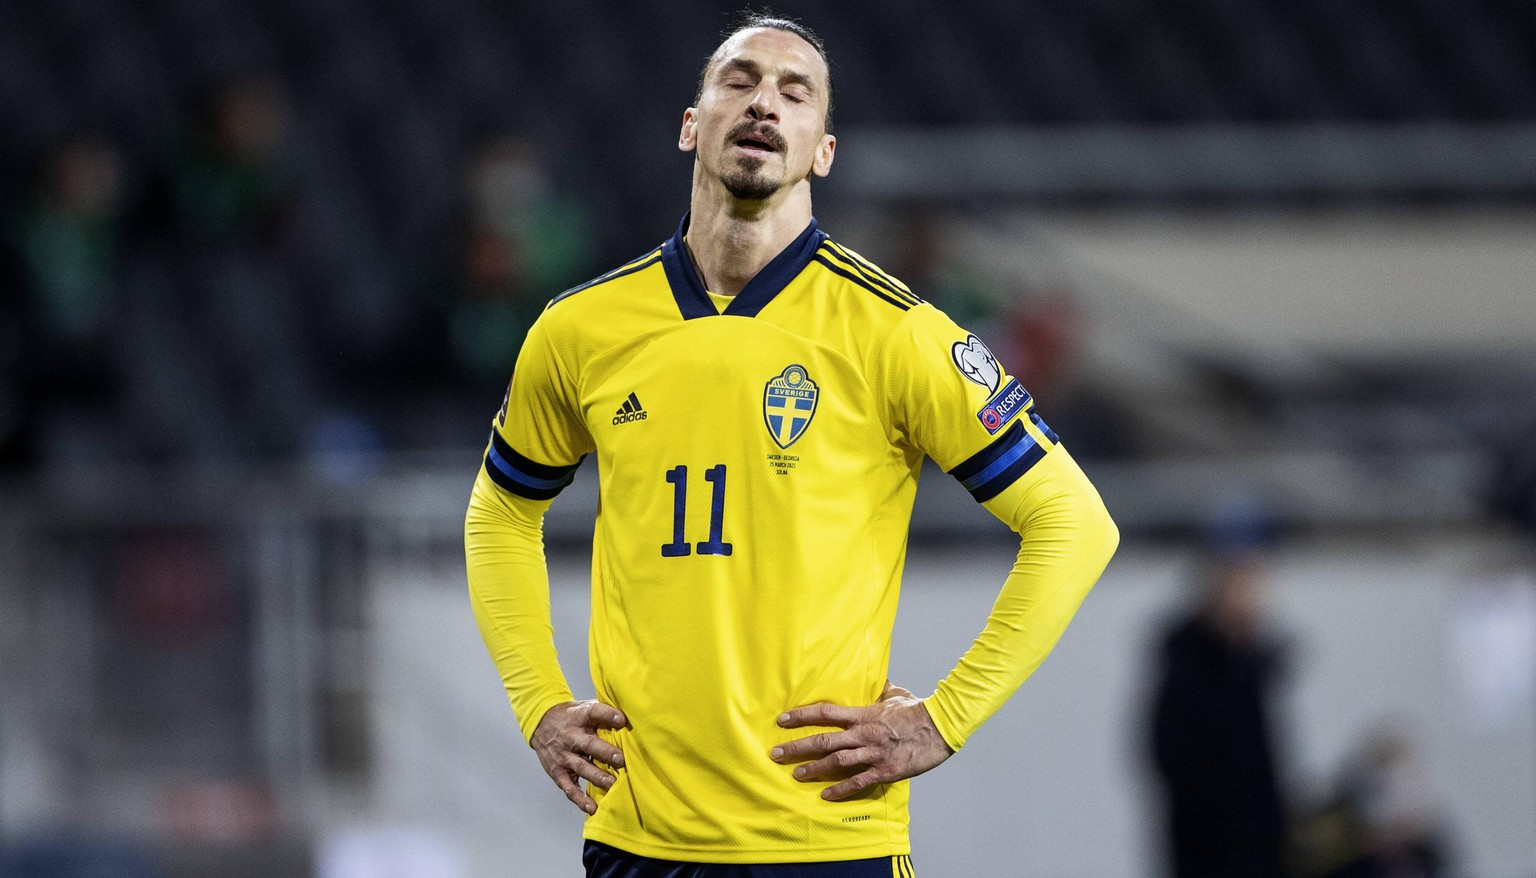 Zlatan Ibrahimovic during the World Cup qualifier group A football match between Sweden and Georgia at Friends Arena Thursday March 25, 2021. 2021-03-25 c NILSSON NILS PETTER / Aftonbladet / TT * * *  ...